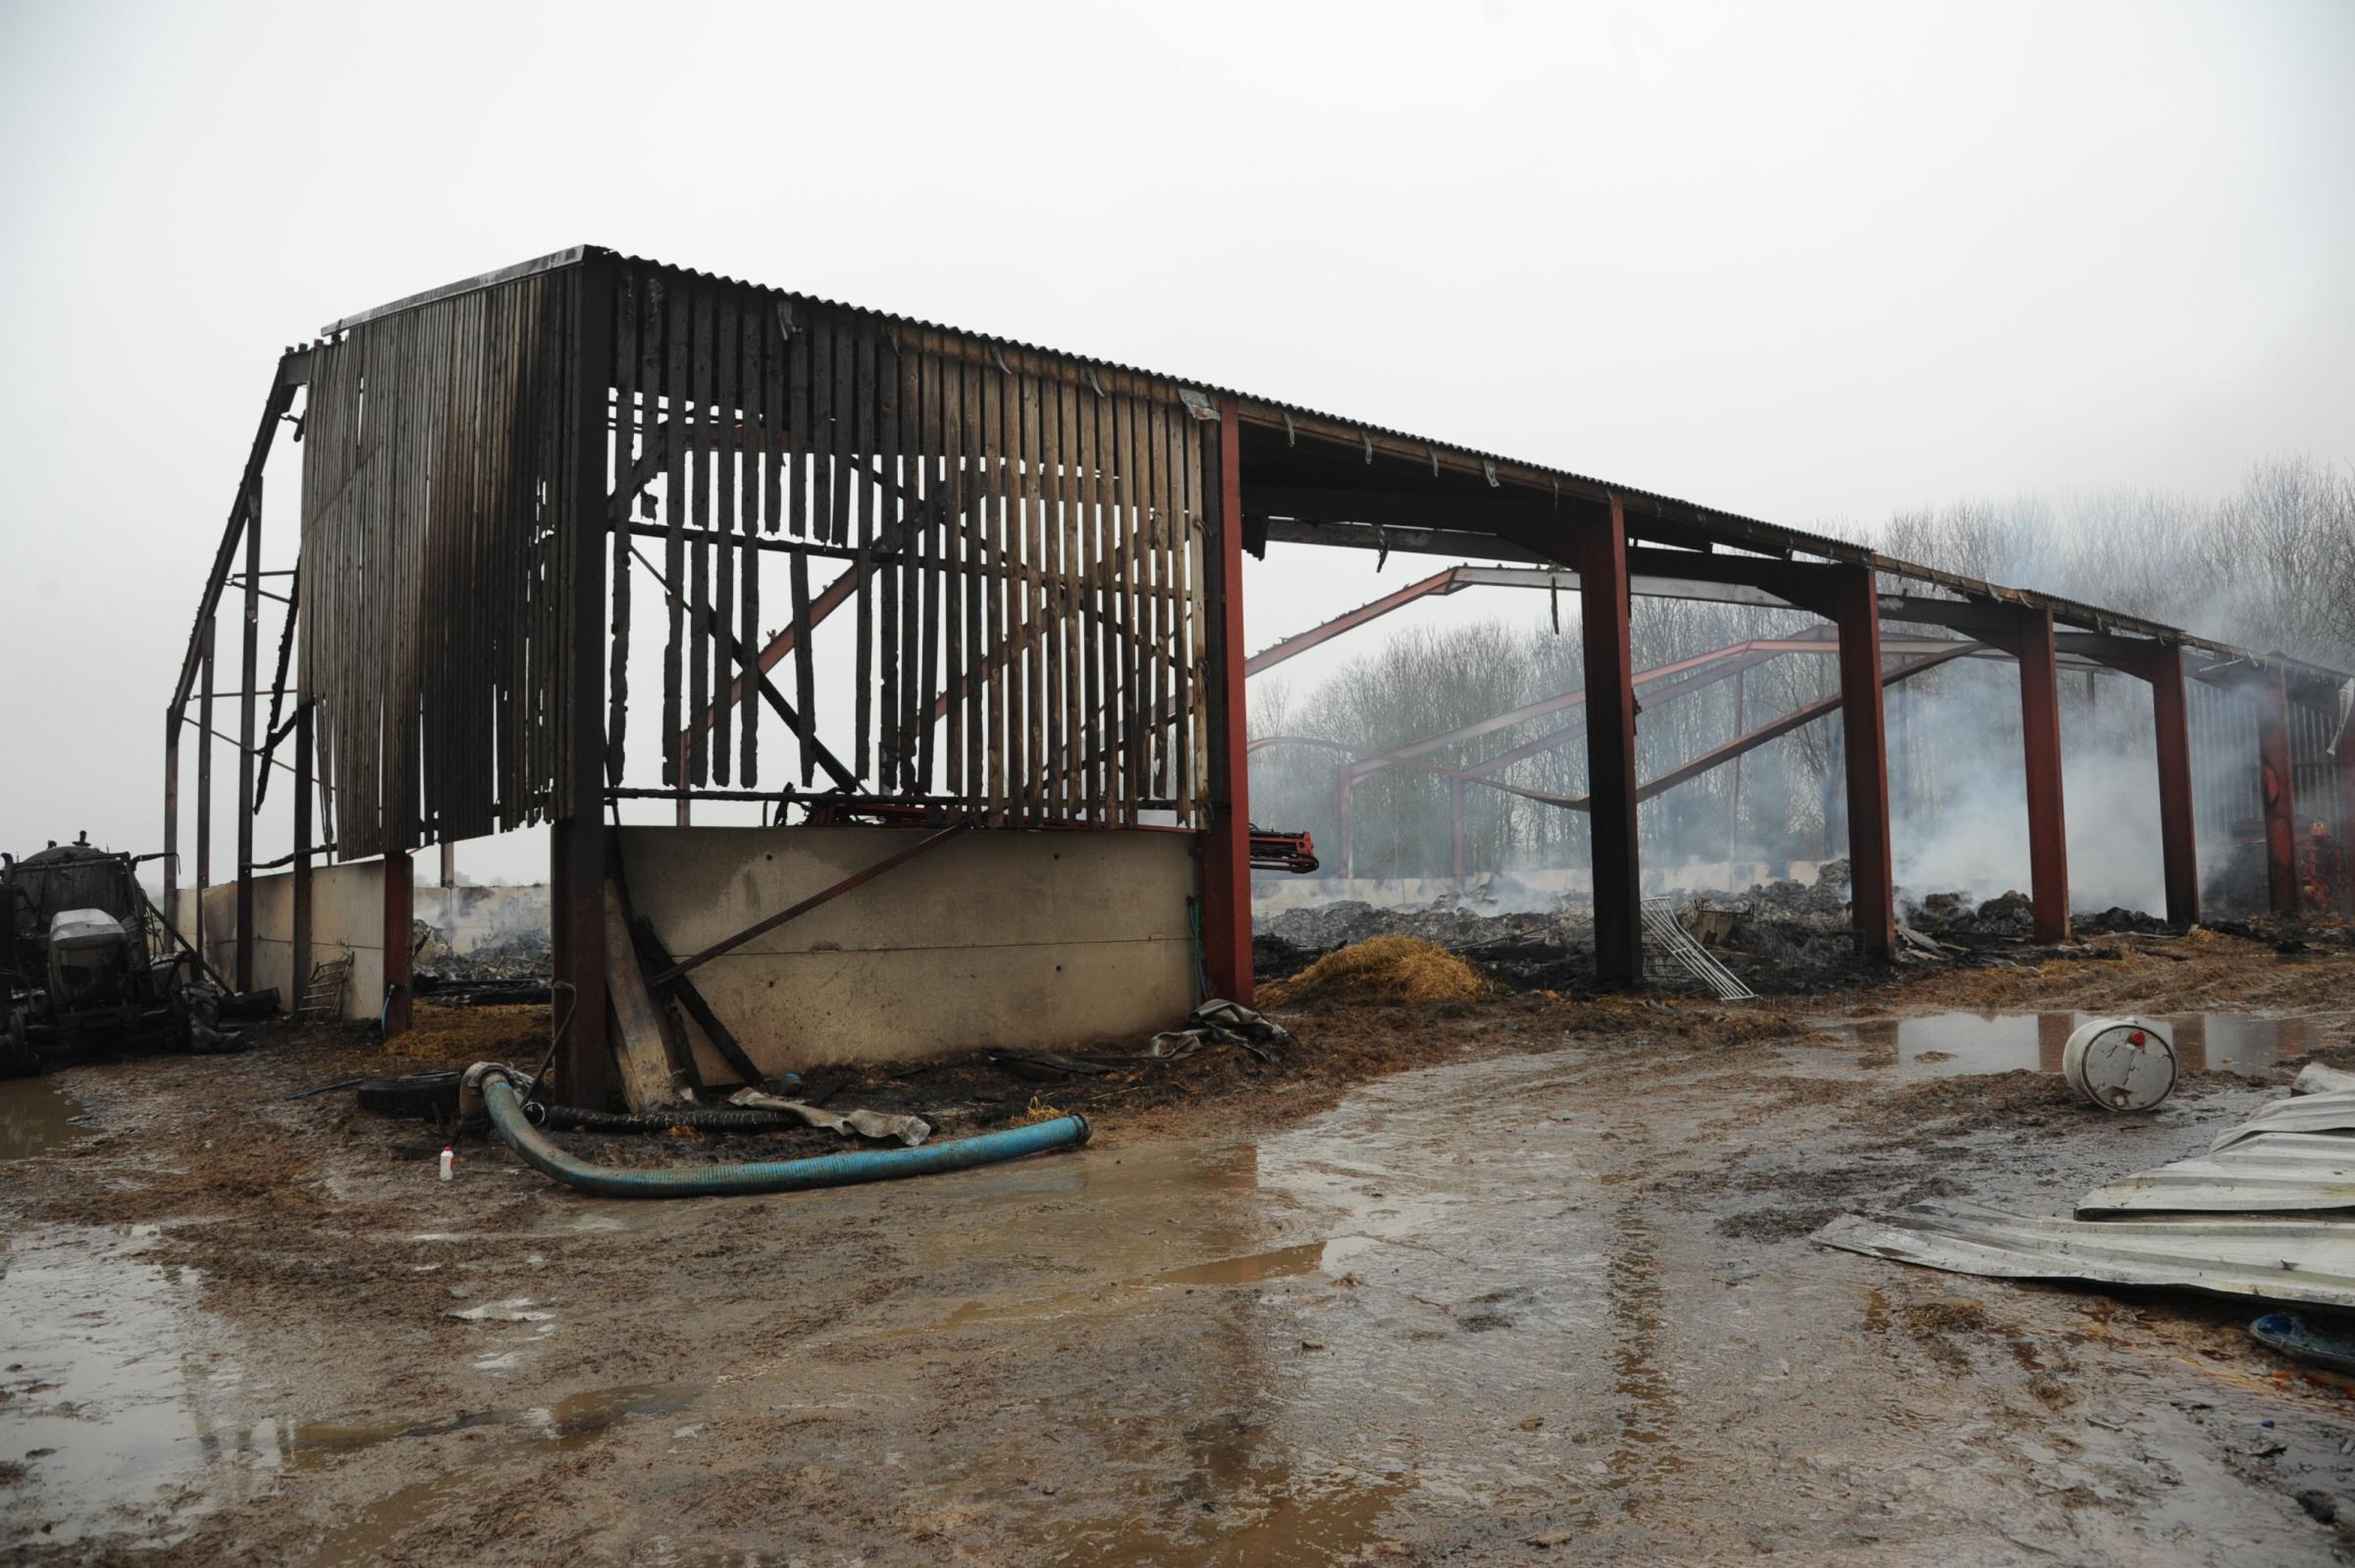 Fire service praised after farm inferno - Wiltshire Times